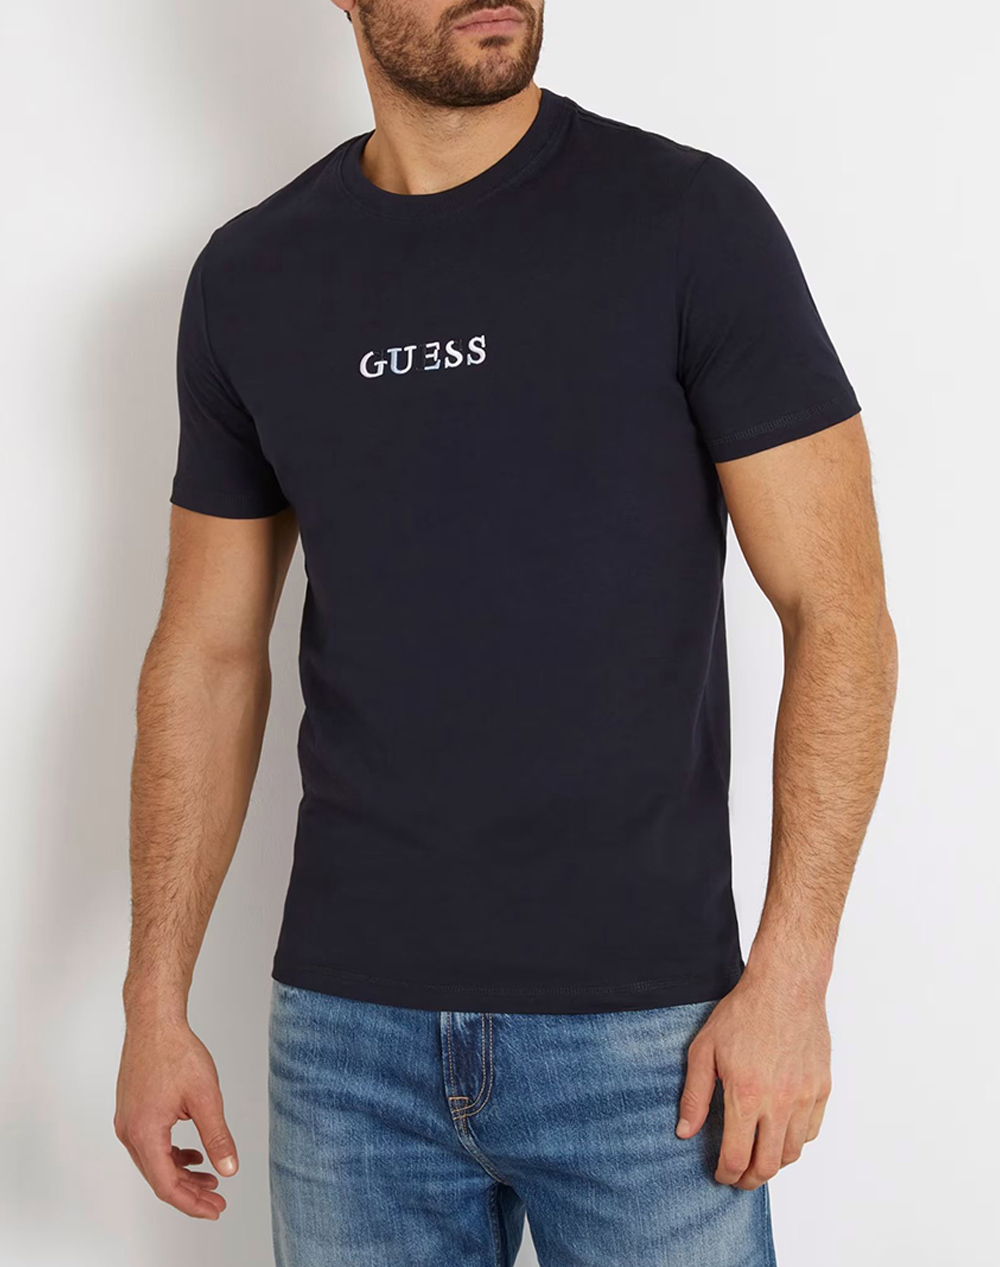 GUESS SS CN GUESS MULTICOLOR TEE ΜΠΛΟΥΖΑ ΑΝΔΡΙΚΟ M4GI92I3Z14-G7V2 DarkBlue 3820AGUES3400074_XR10004